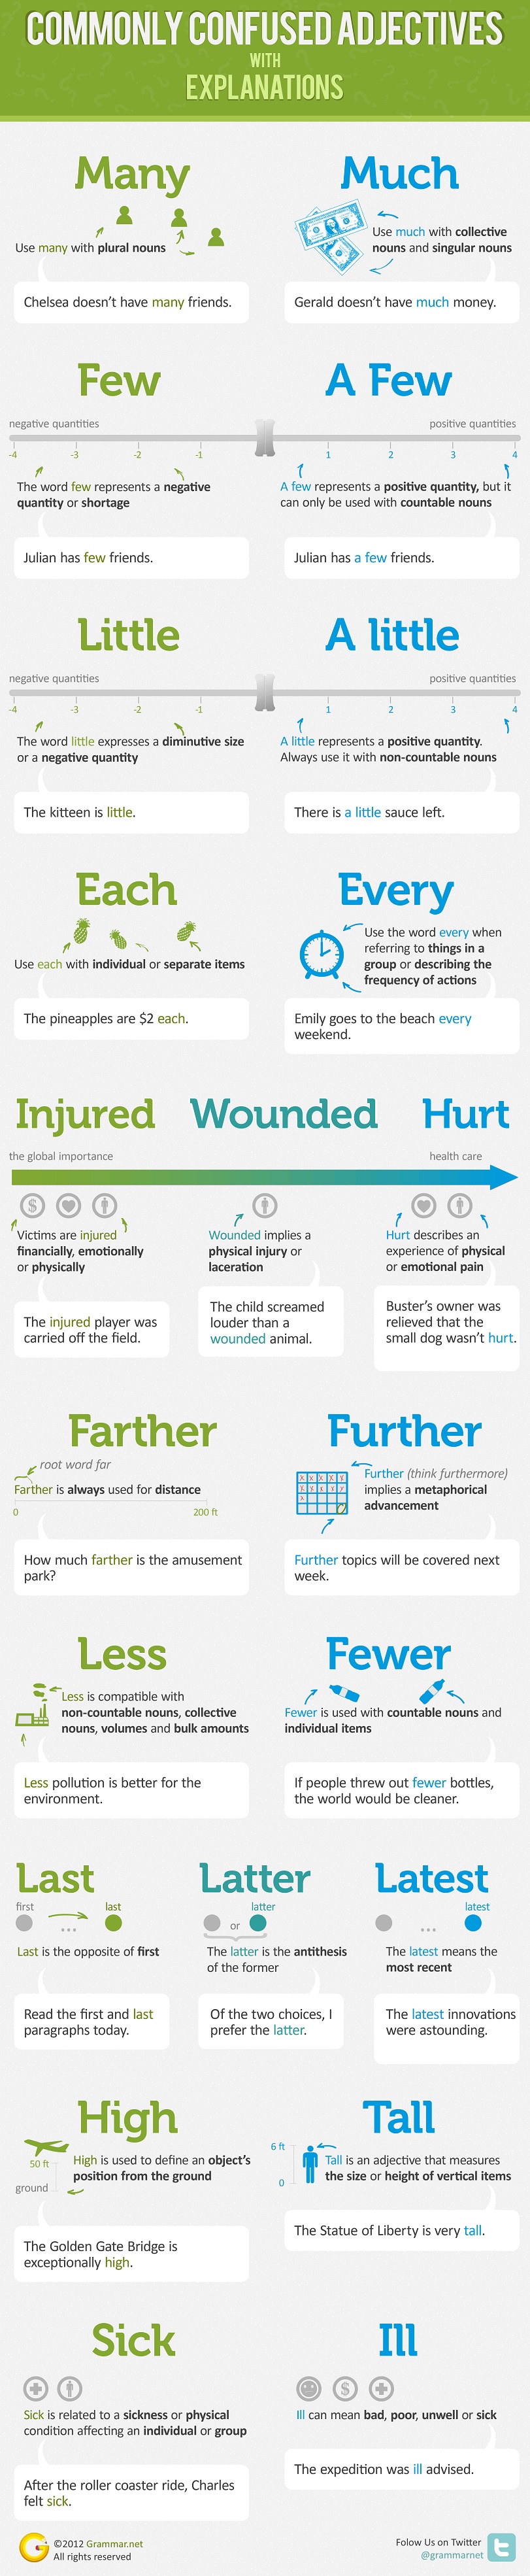 Infographic Commonly Confused Adjectives with Explanation